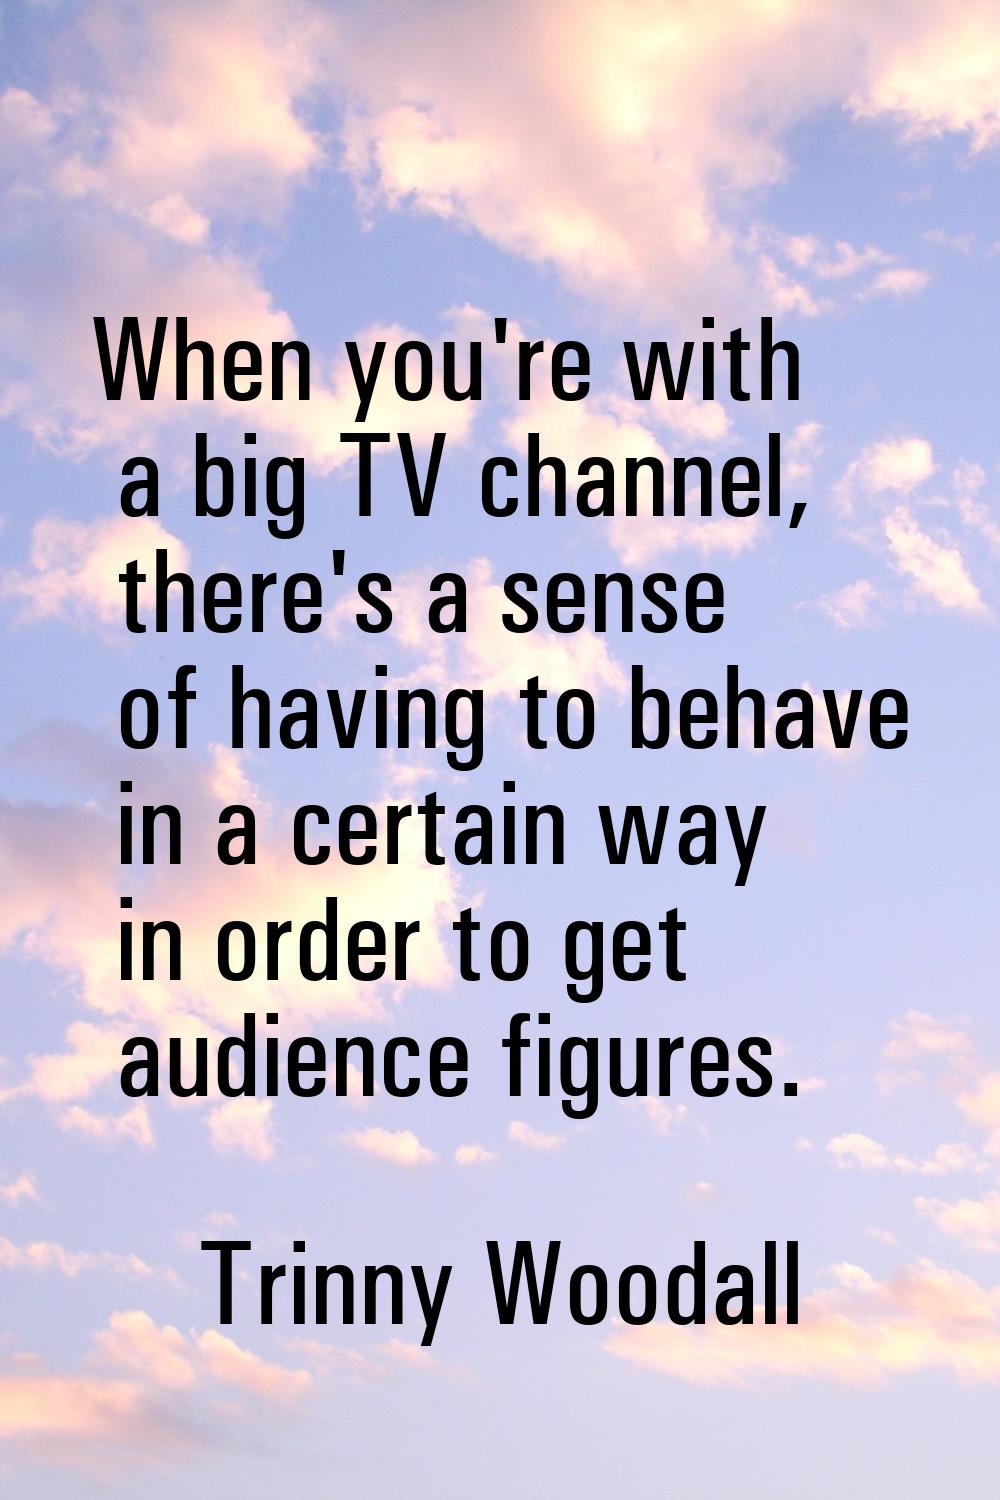 When you're with a big TV channel, there's a sense of having to behave in a certain way in order to